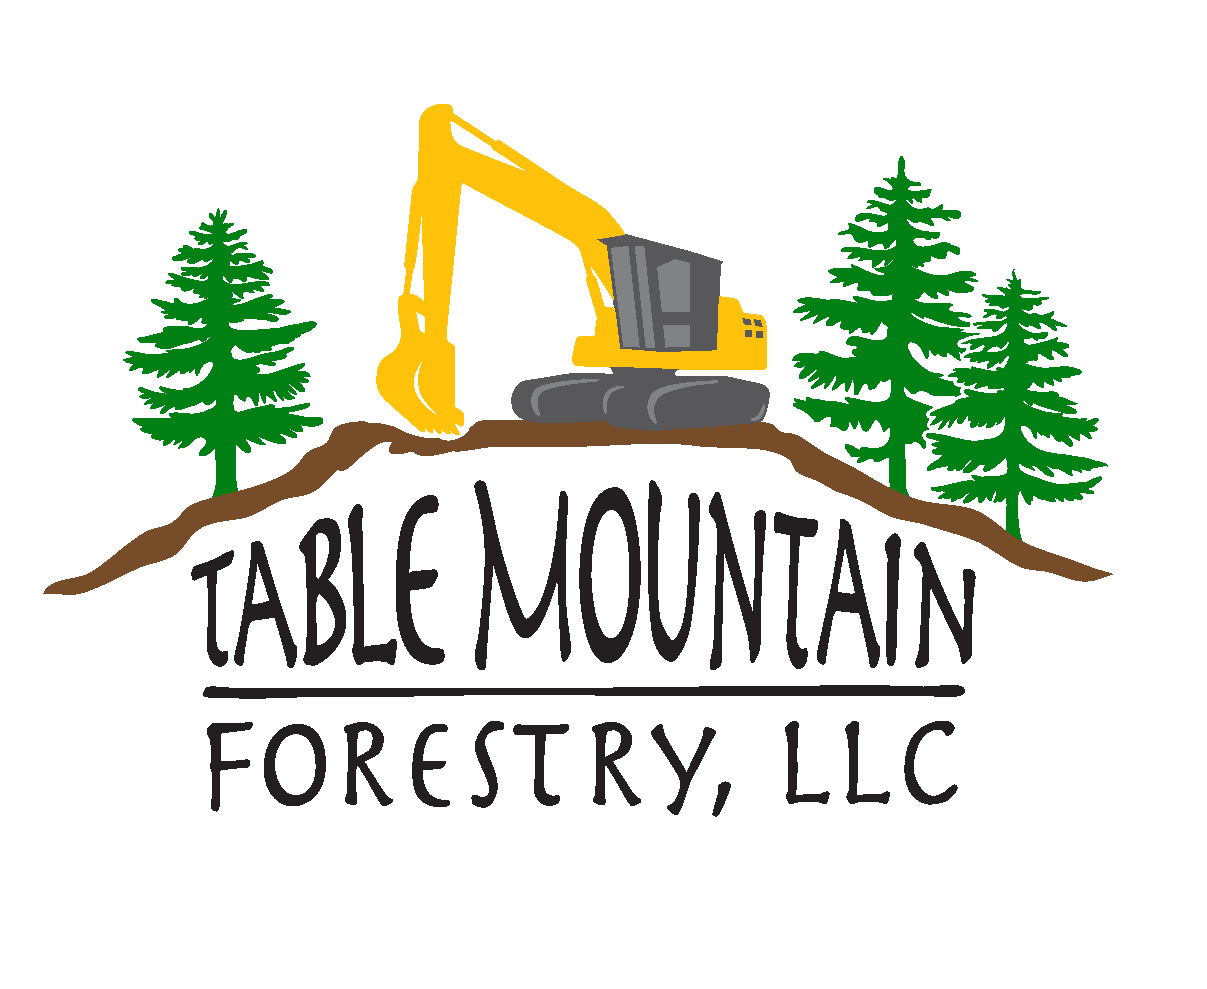 Table Mountain Forestry, LLC